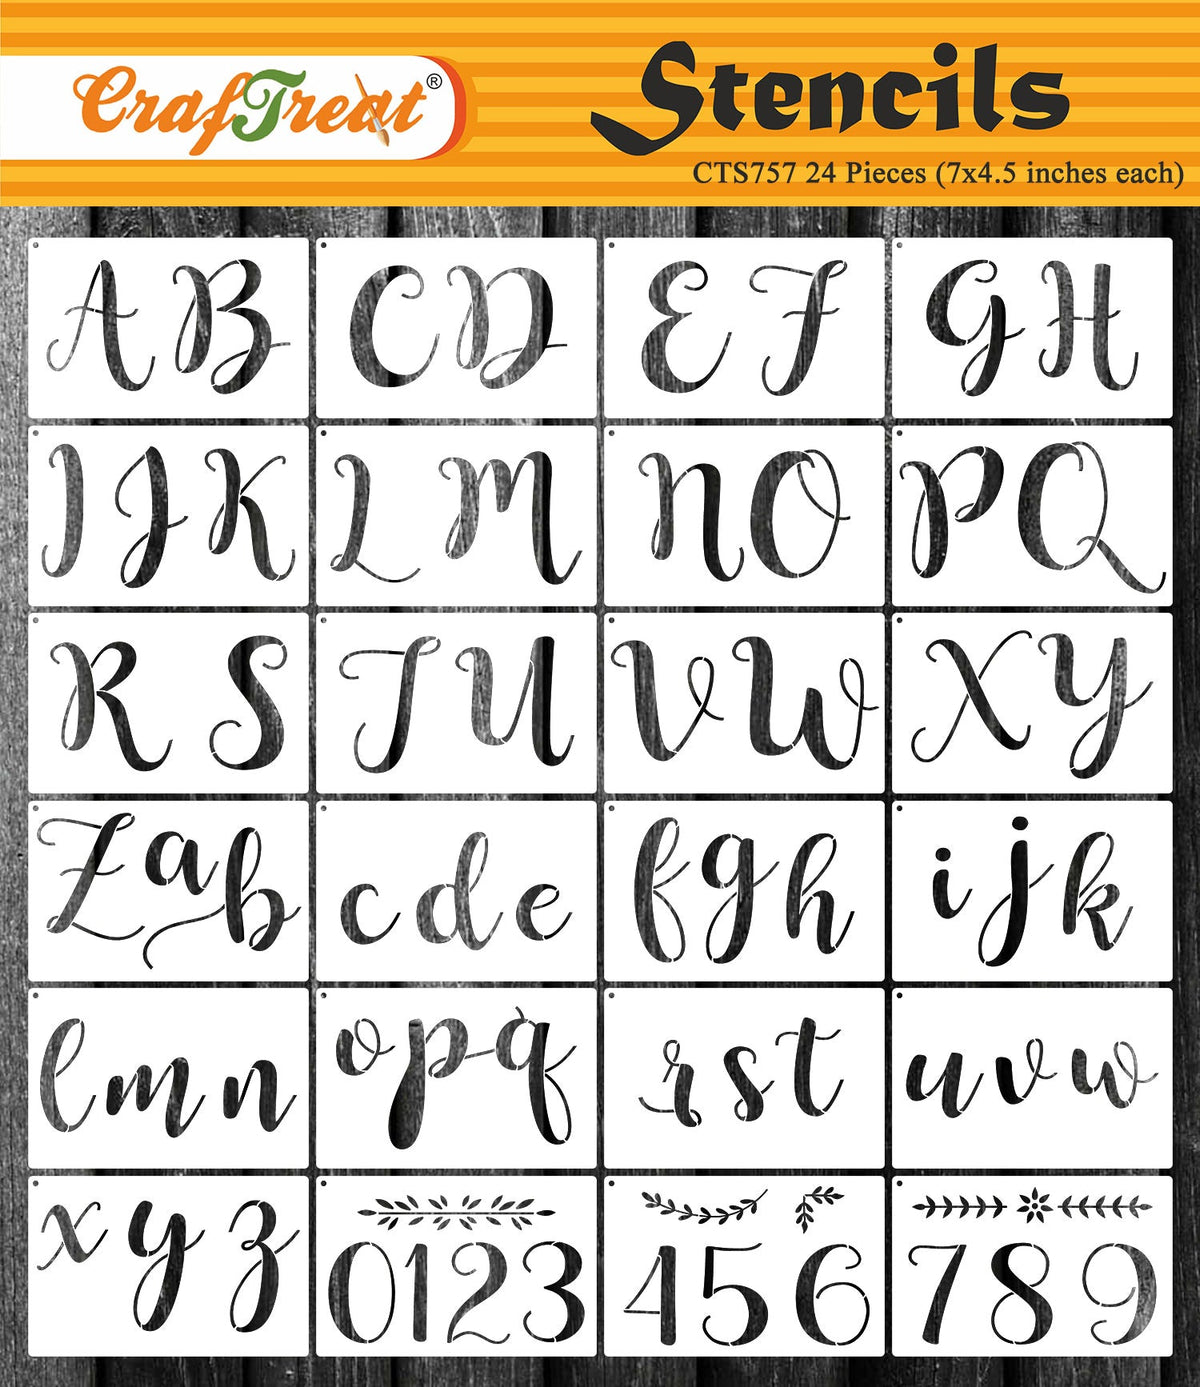 Stencil Plastic A4 A to Z/0 to 9 Small letter symbols at Rs 76.00